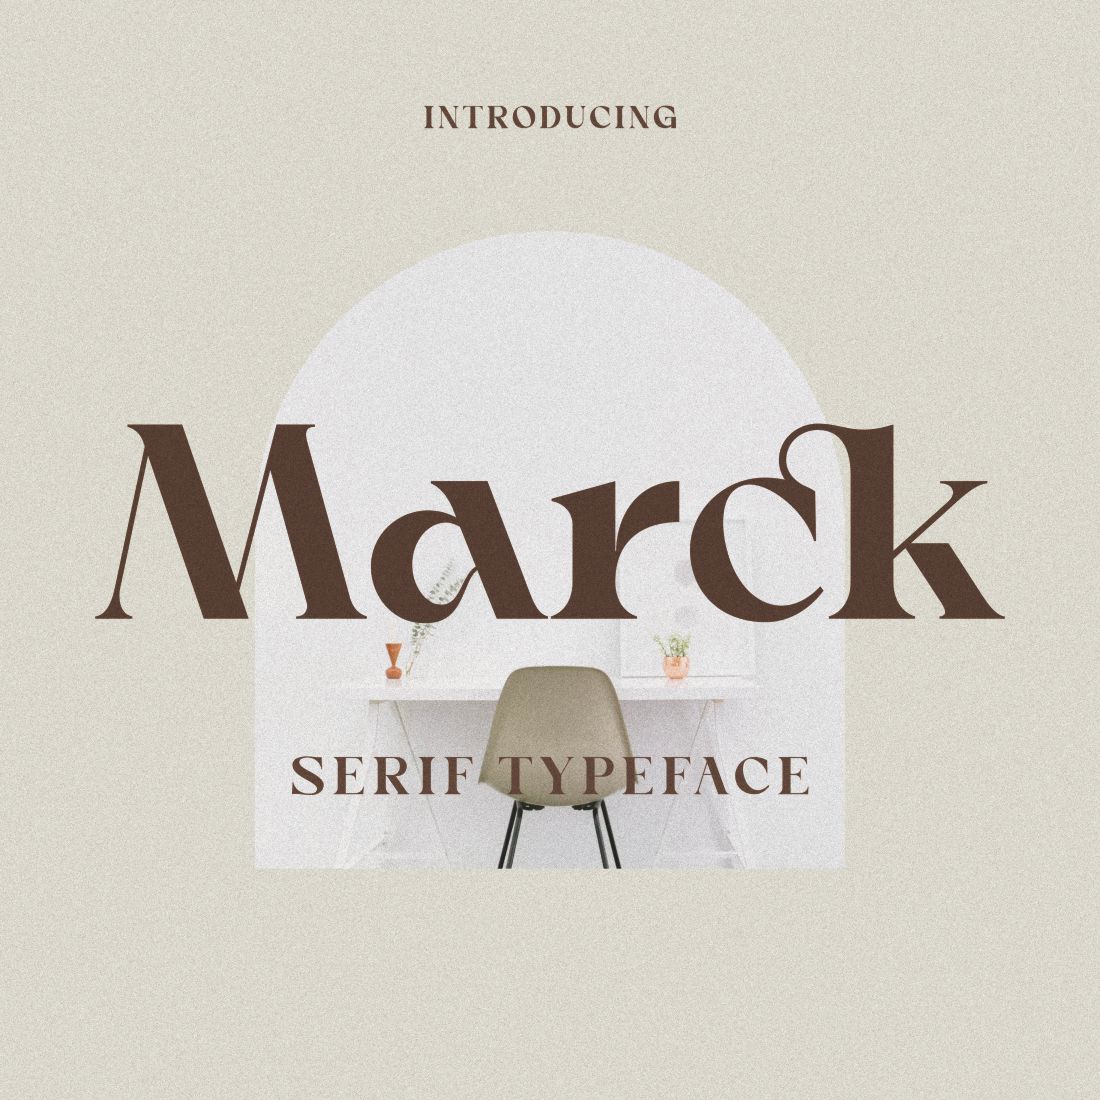 Marck _ Modern Typeface cover image.